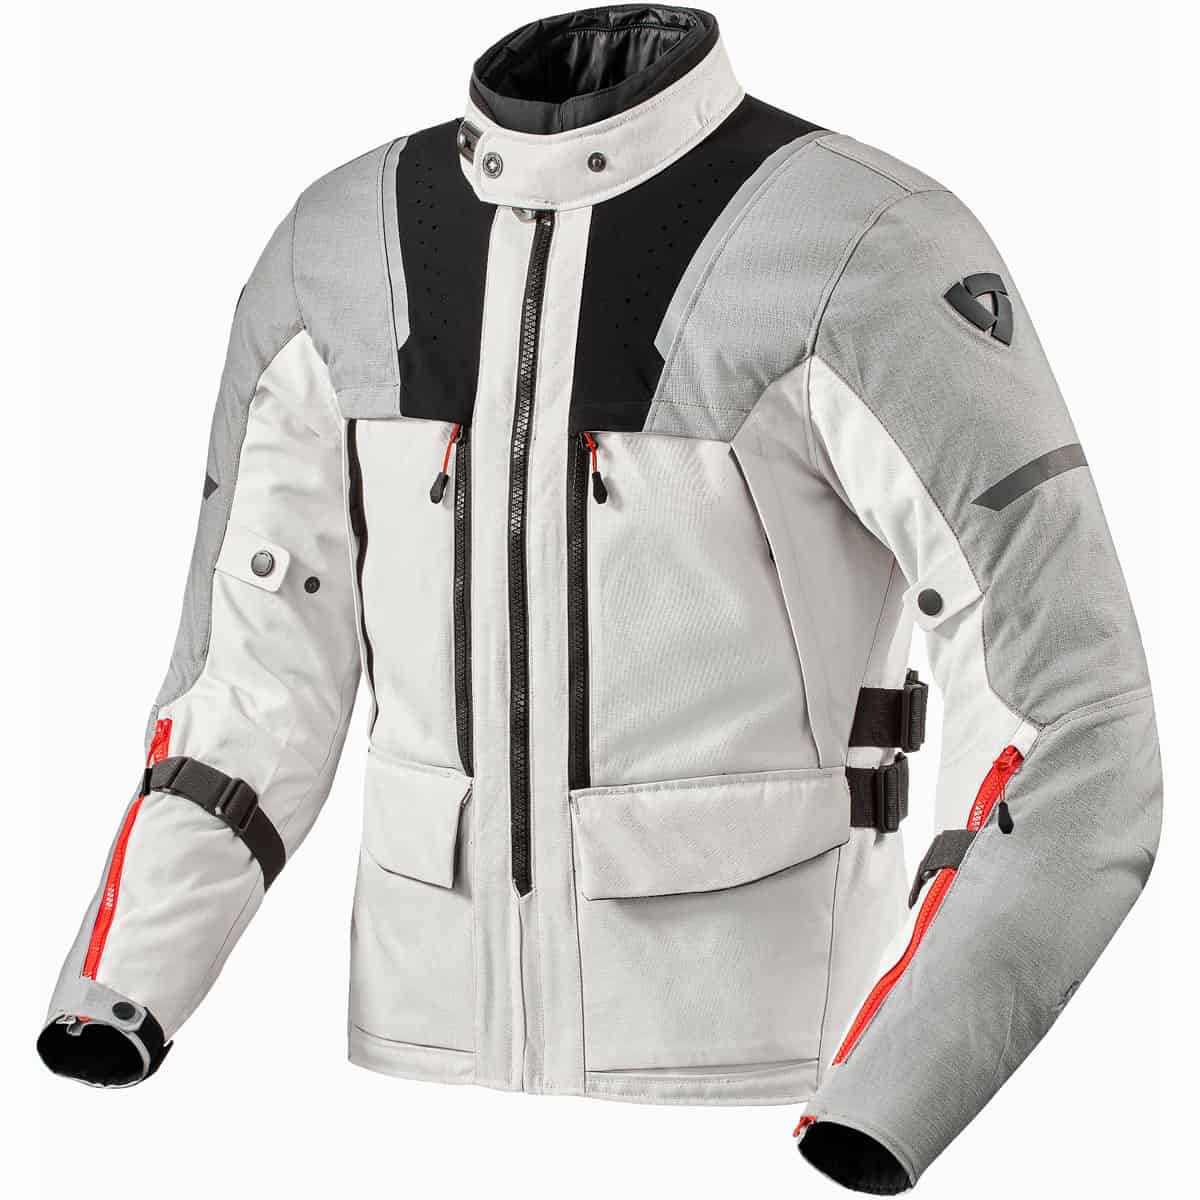 Take charge of your next adventure in the Revit Offtrack 2 H2O motorcycle jacket, designed to keep you comfortable and safe at any temperature.